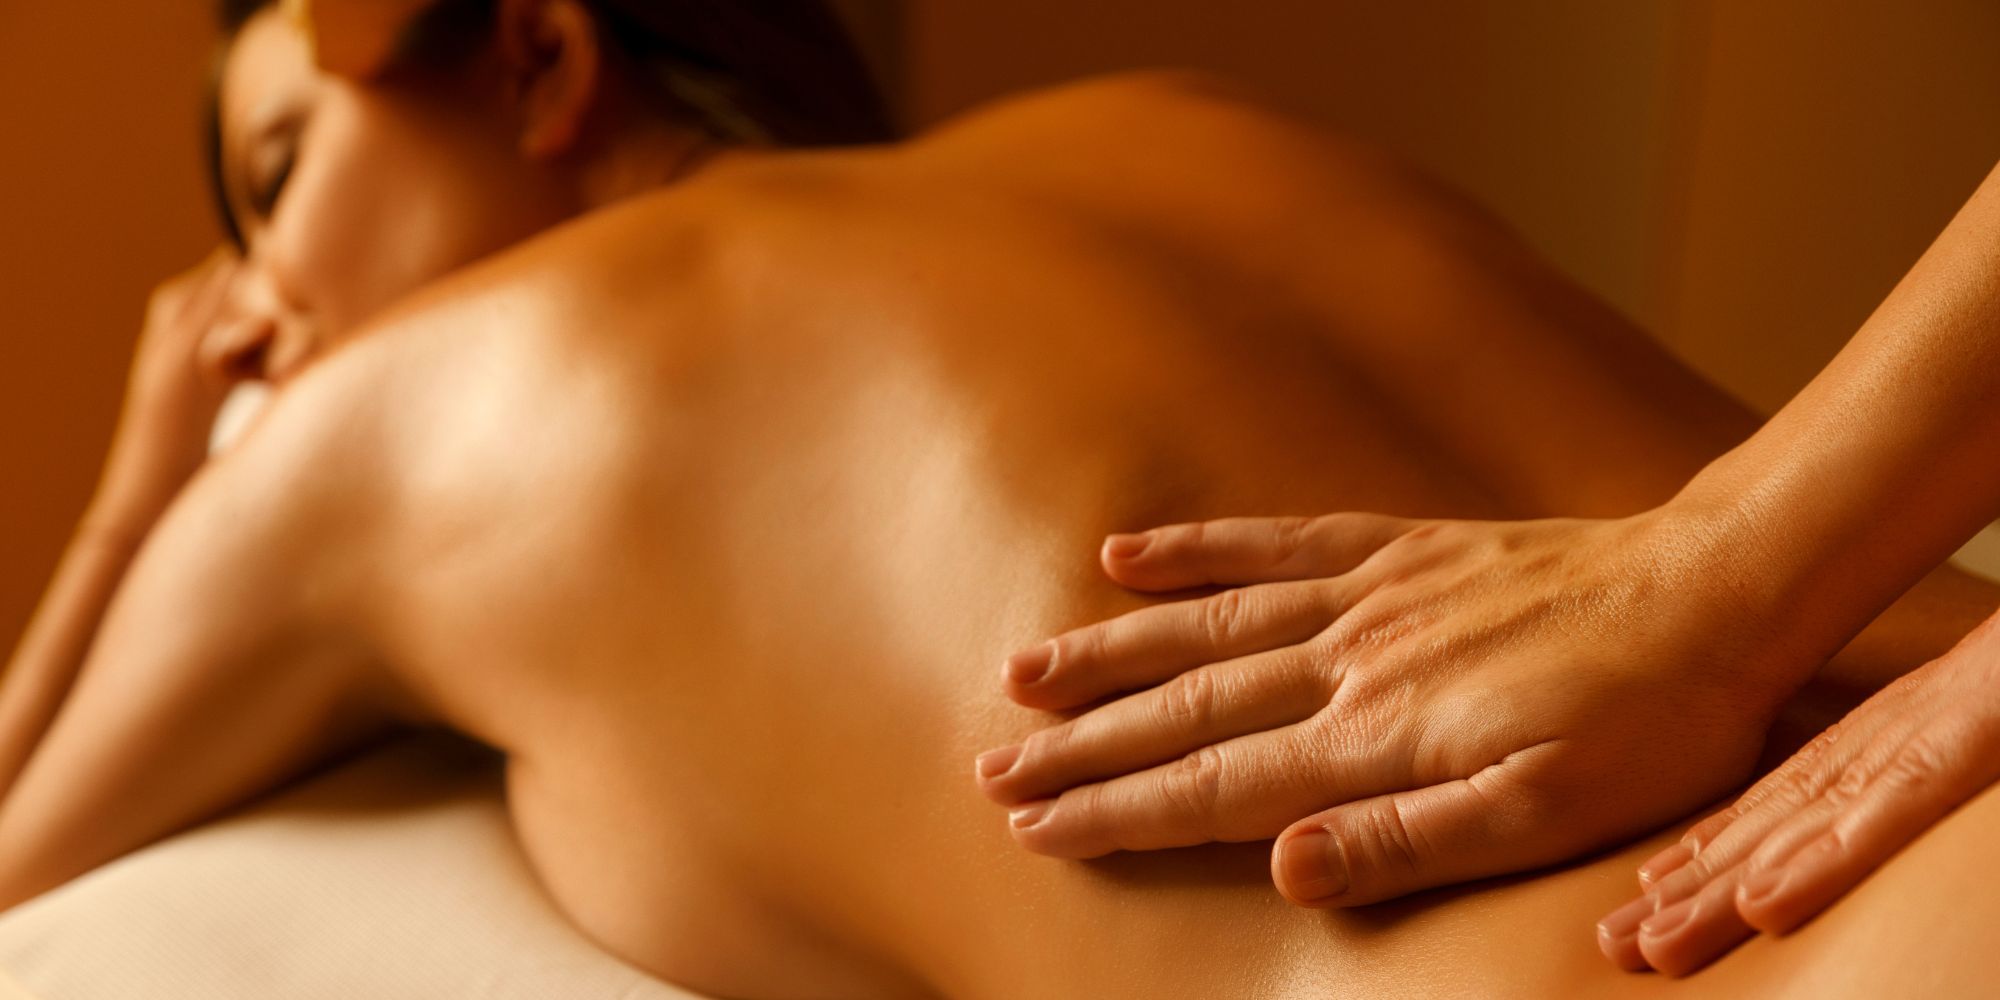 Relaxing back massage and its benefits - Massagepoint